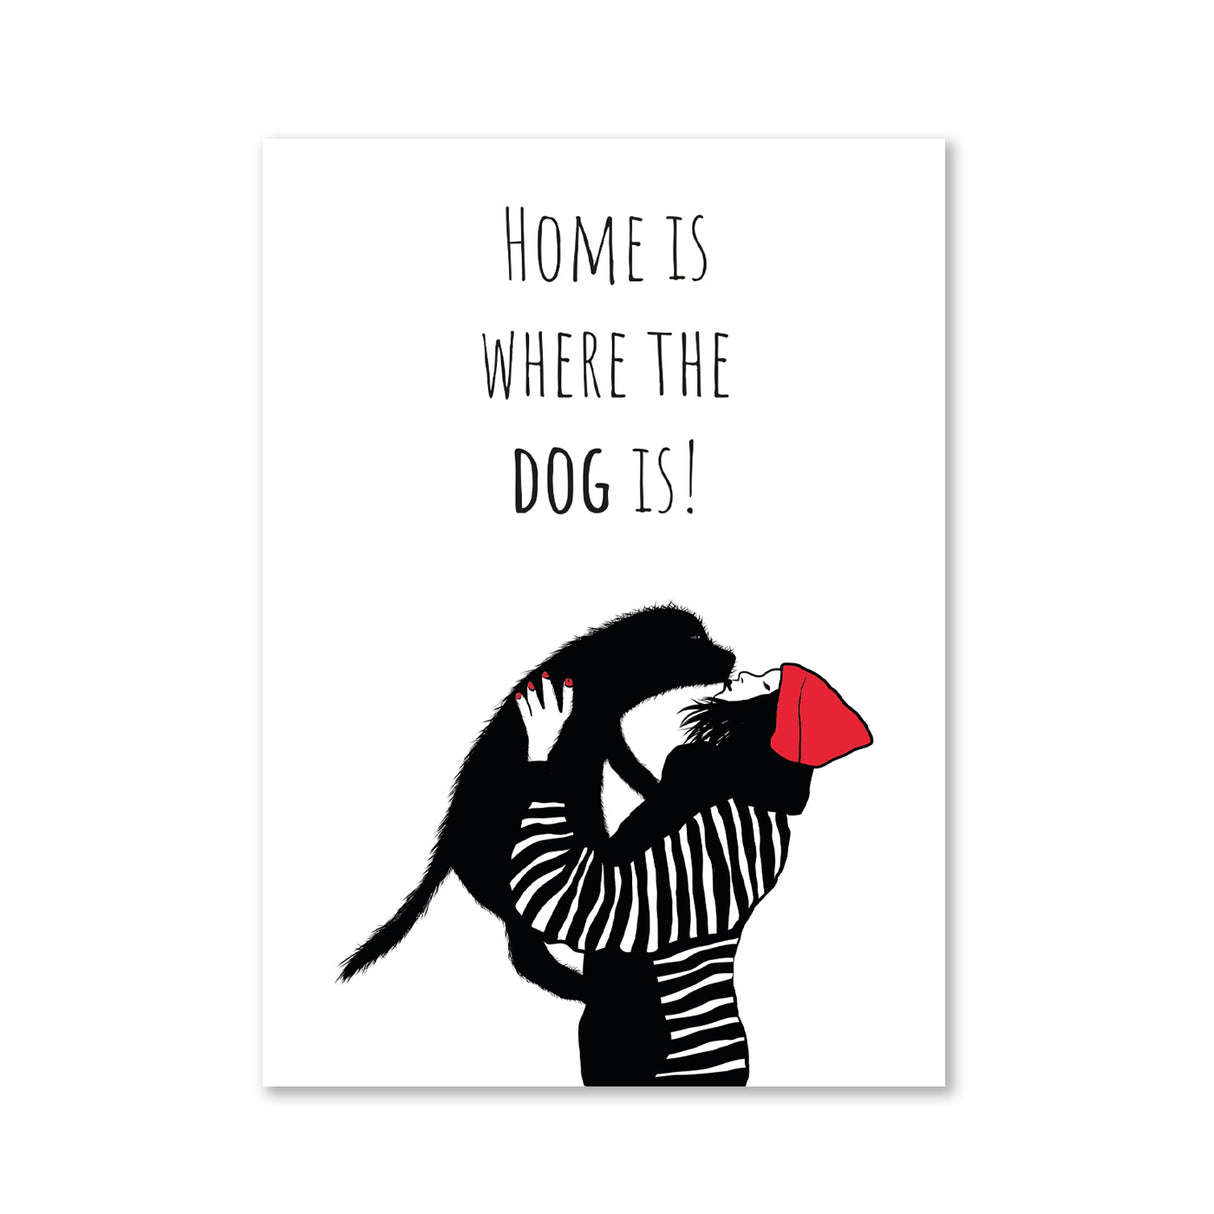 Home is, where the dog is - Magnet